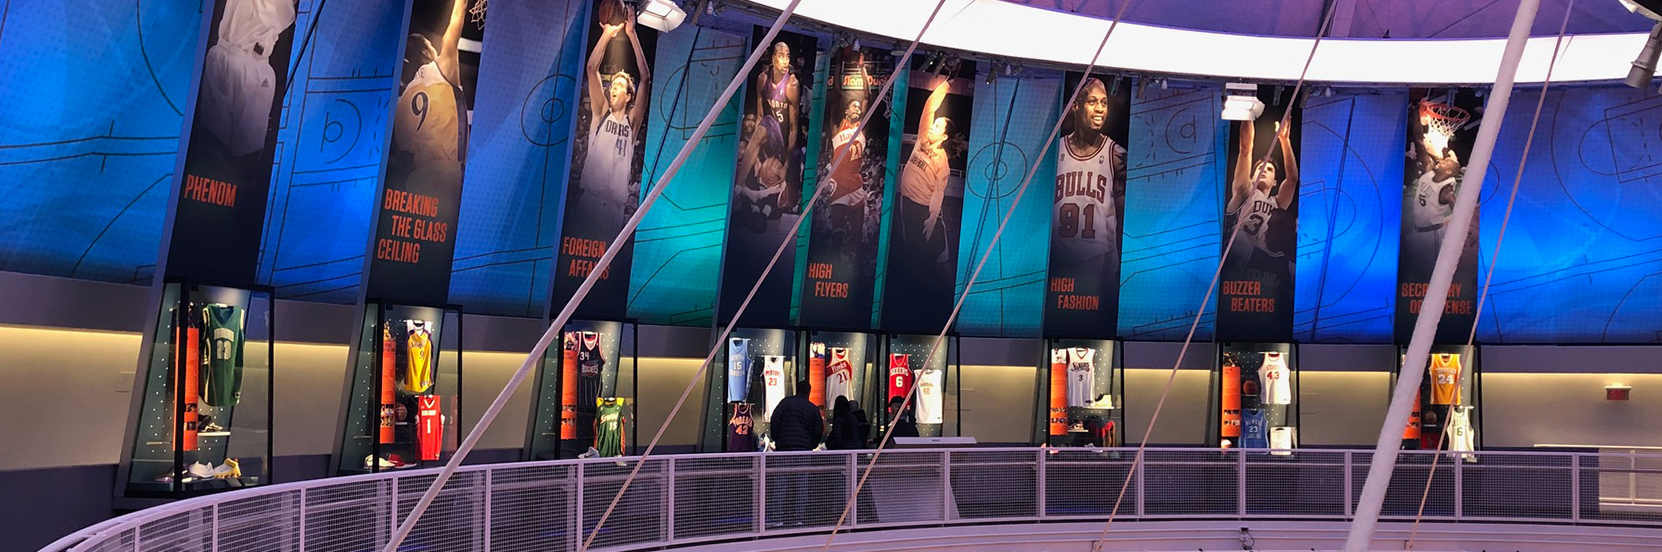 Is the NBA Planning More Stores Abroad?